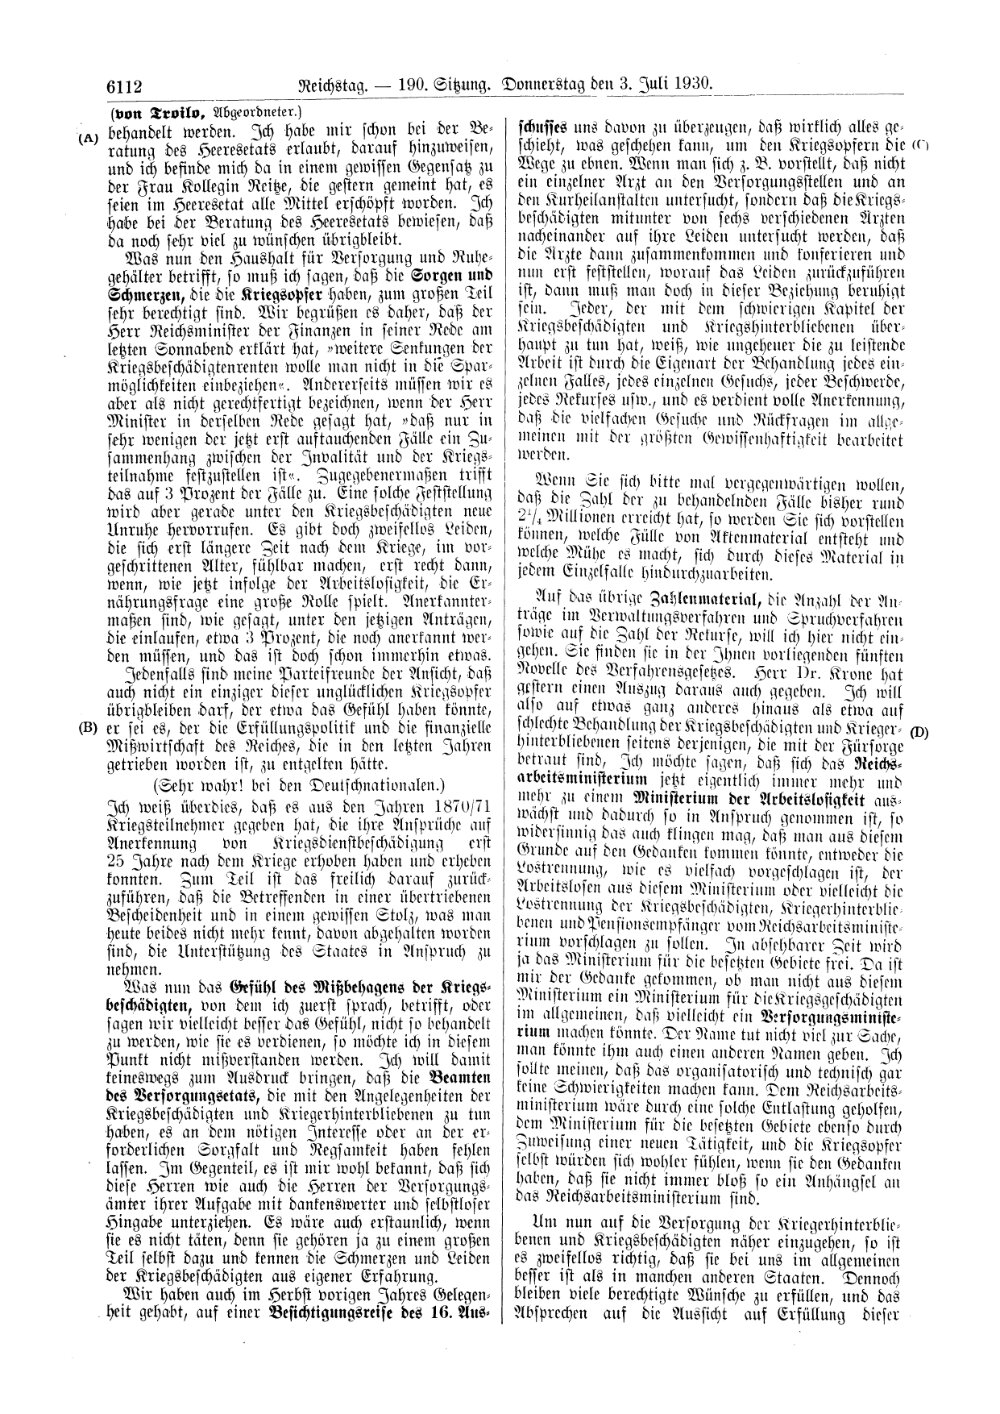 Scan of page 6112